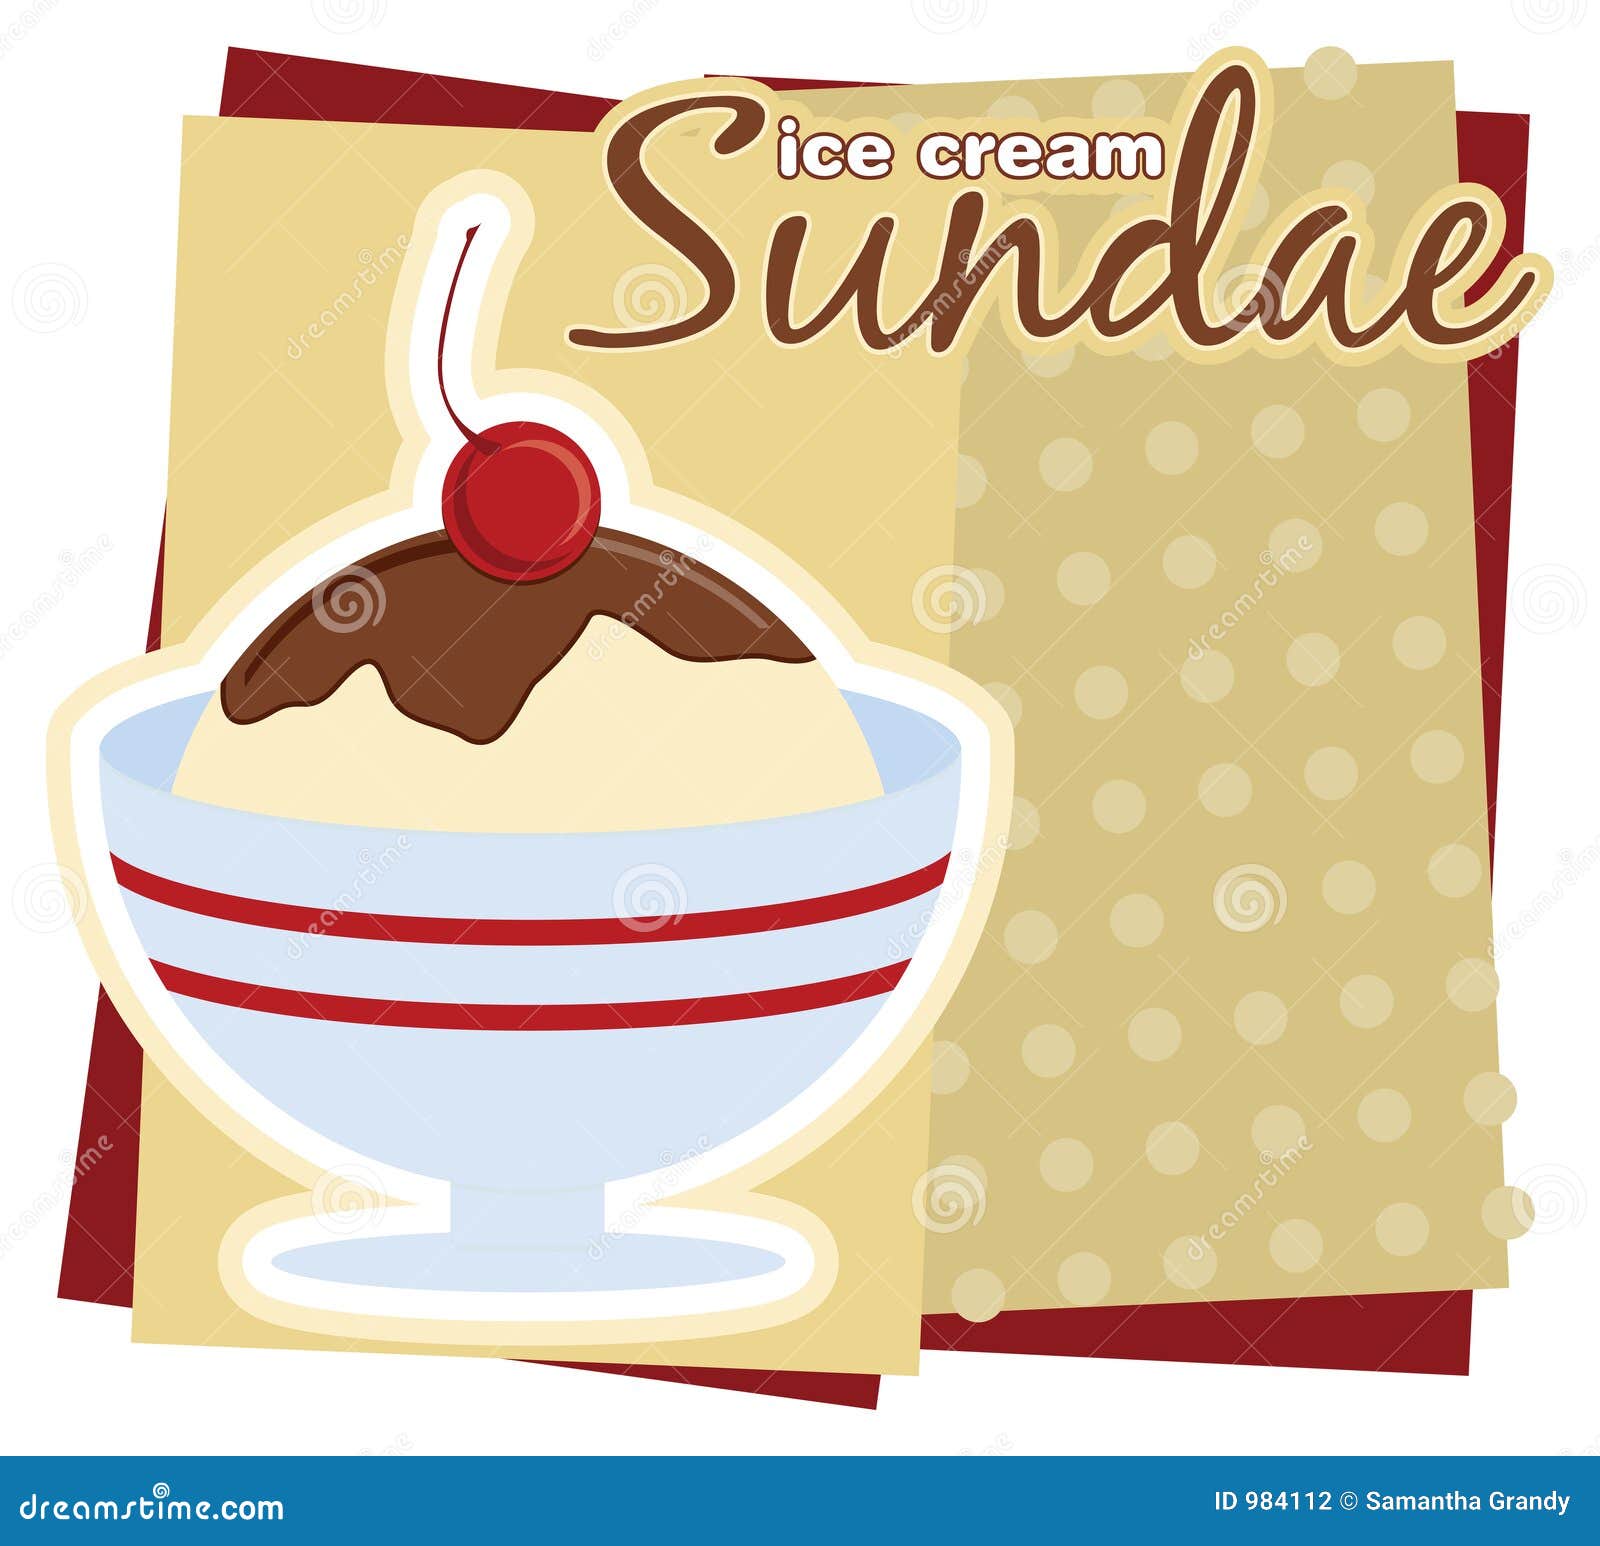 ice cream toppings clipart - photo #38